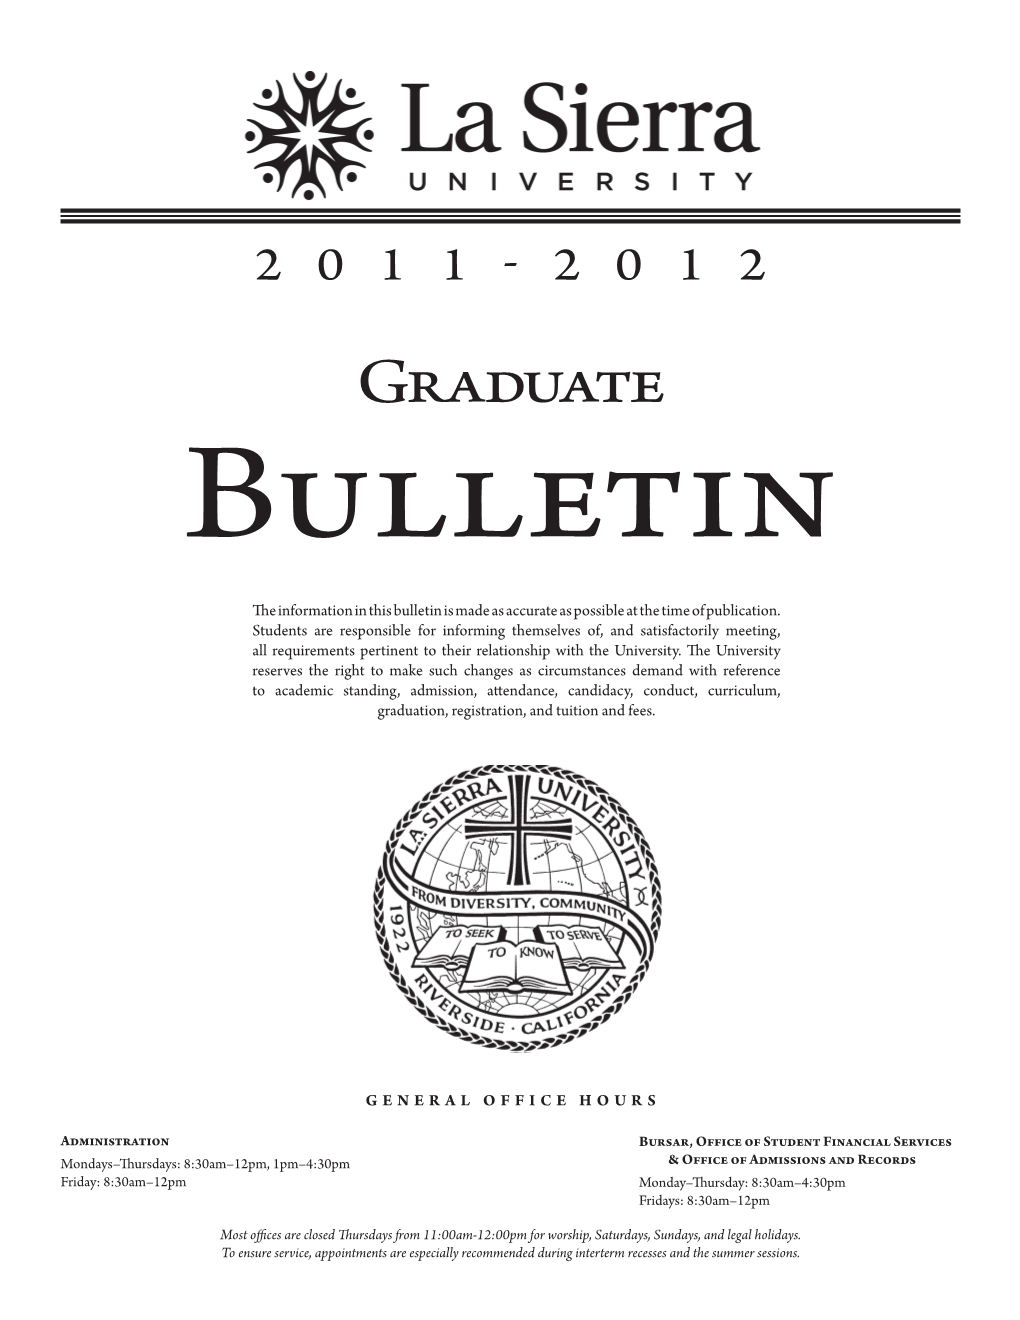 Graduate Bulletin the Information in This Bulletin Is Made As Accurate As Possible at the Time of Publication